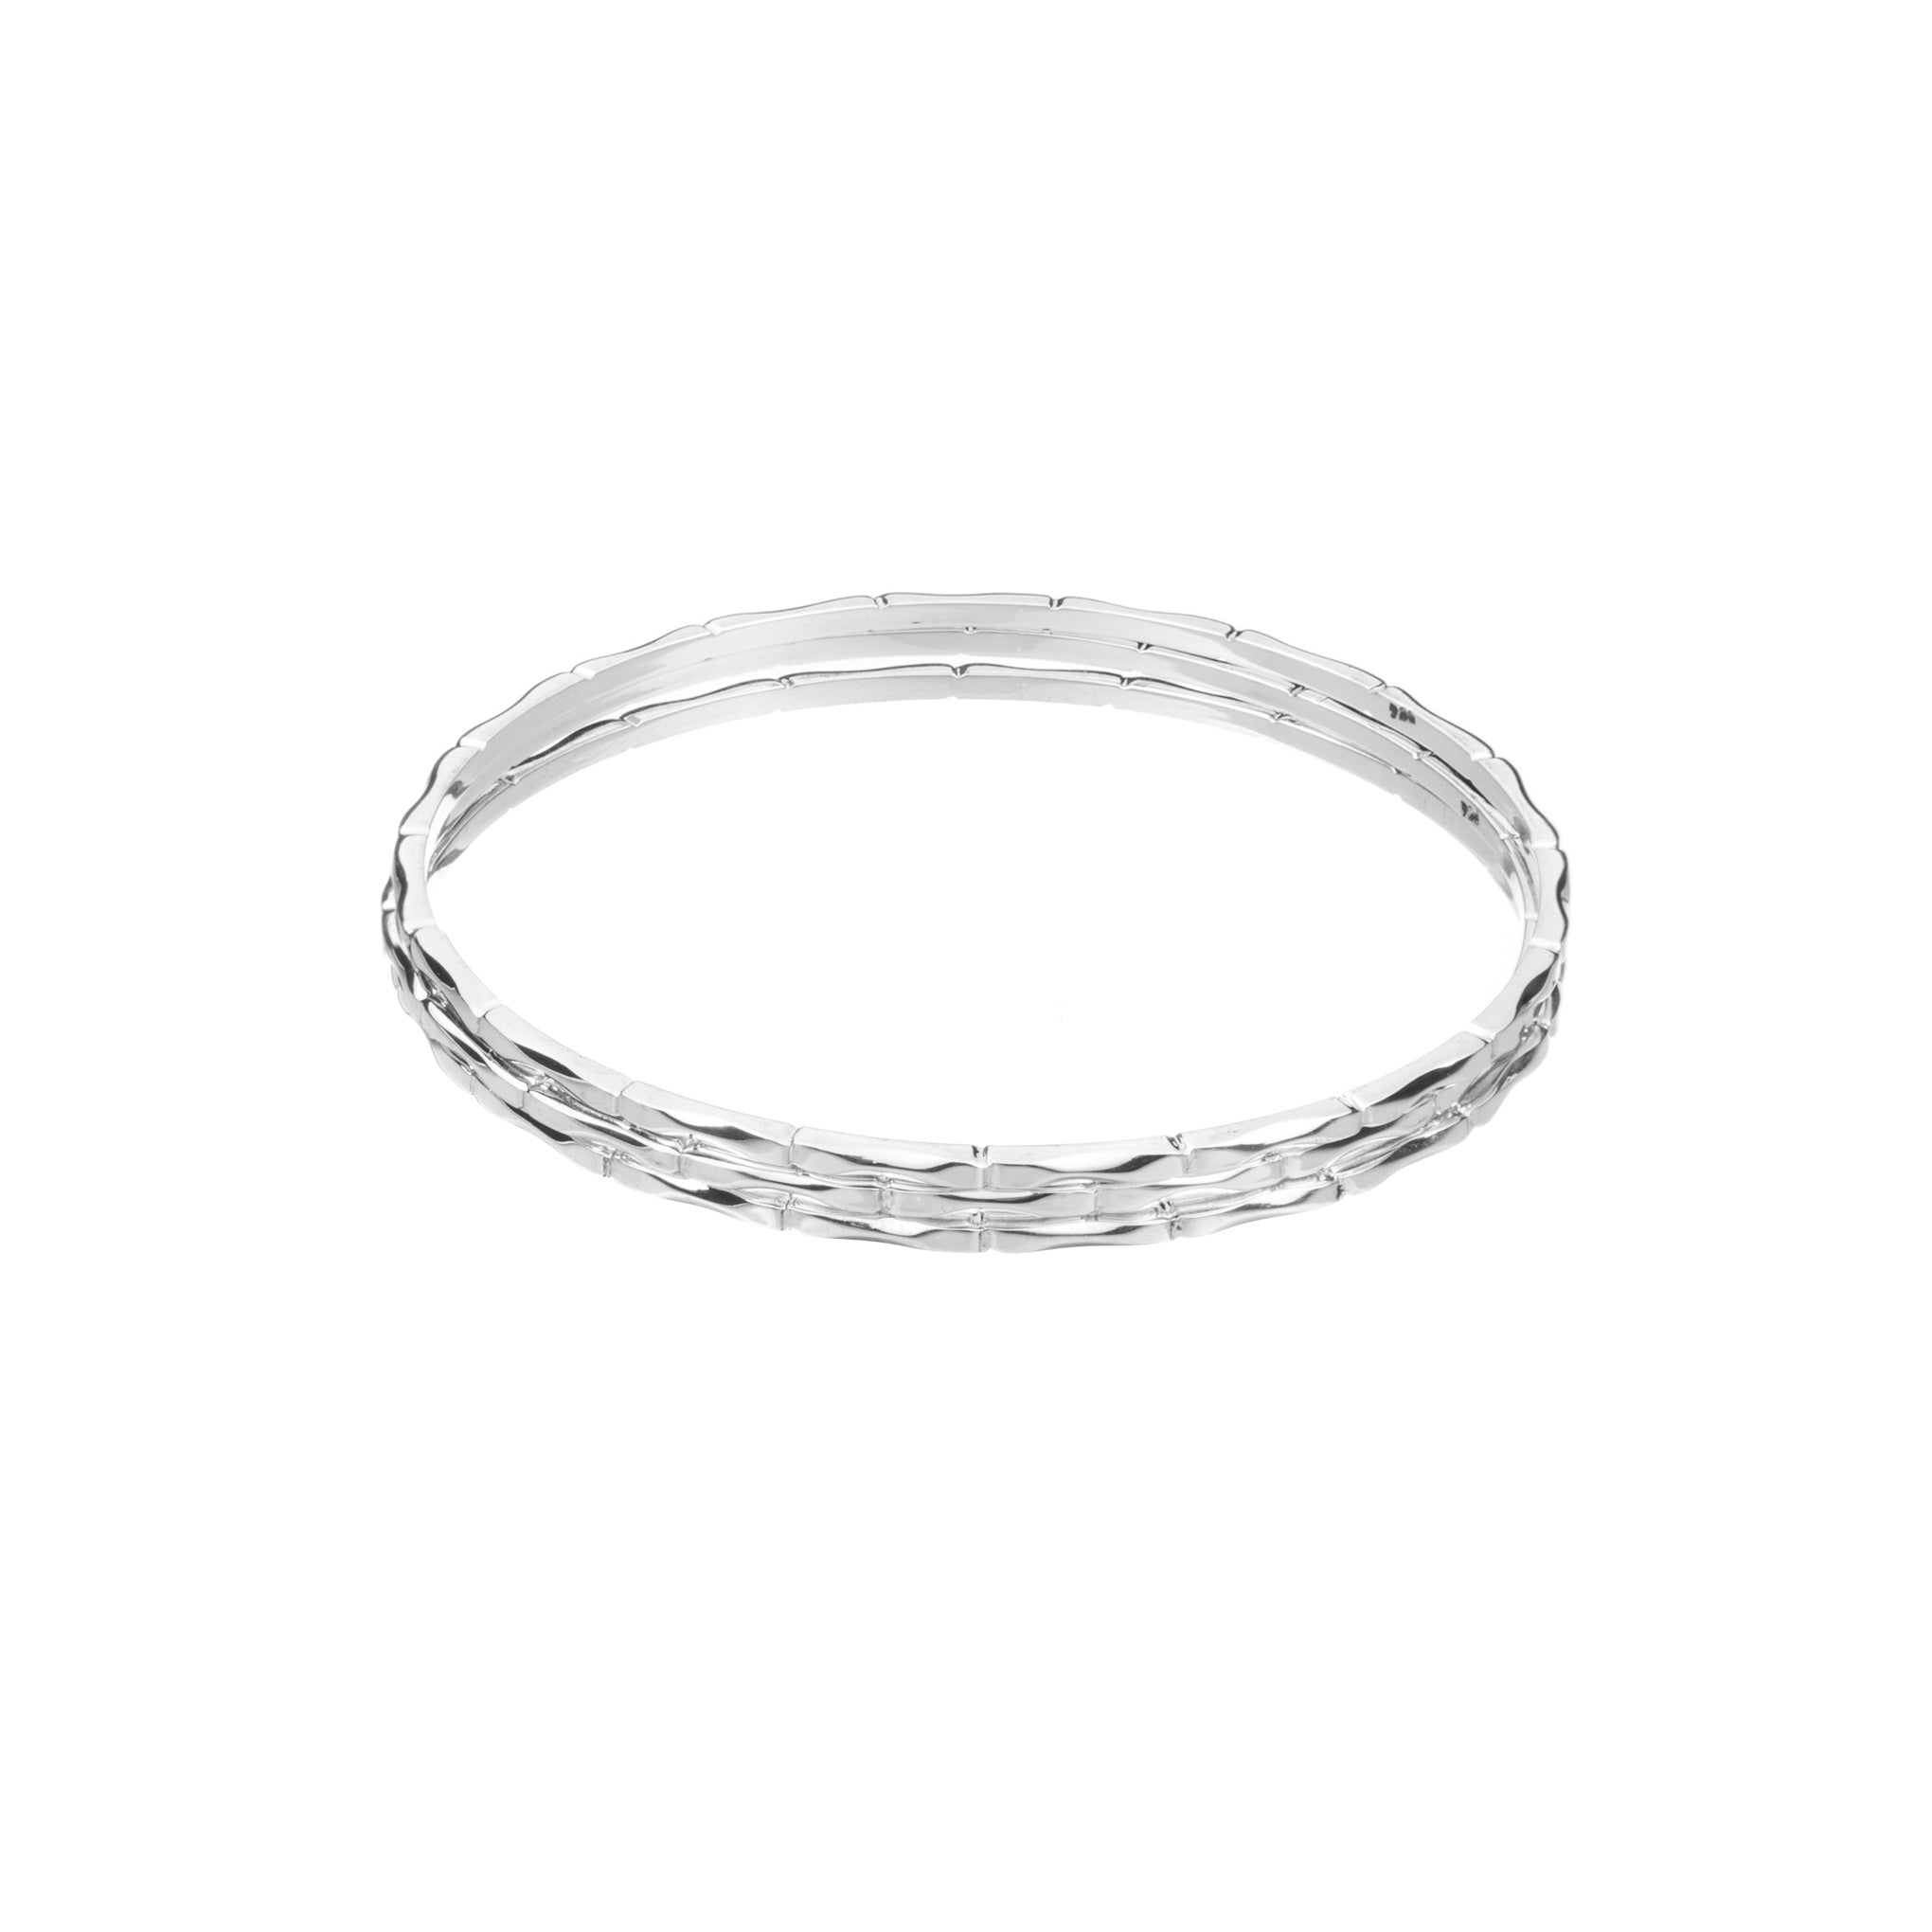 Weekend bracelet with silver bamboo detail